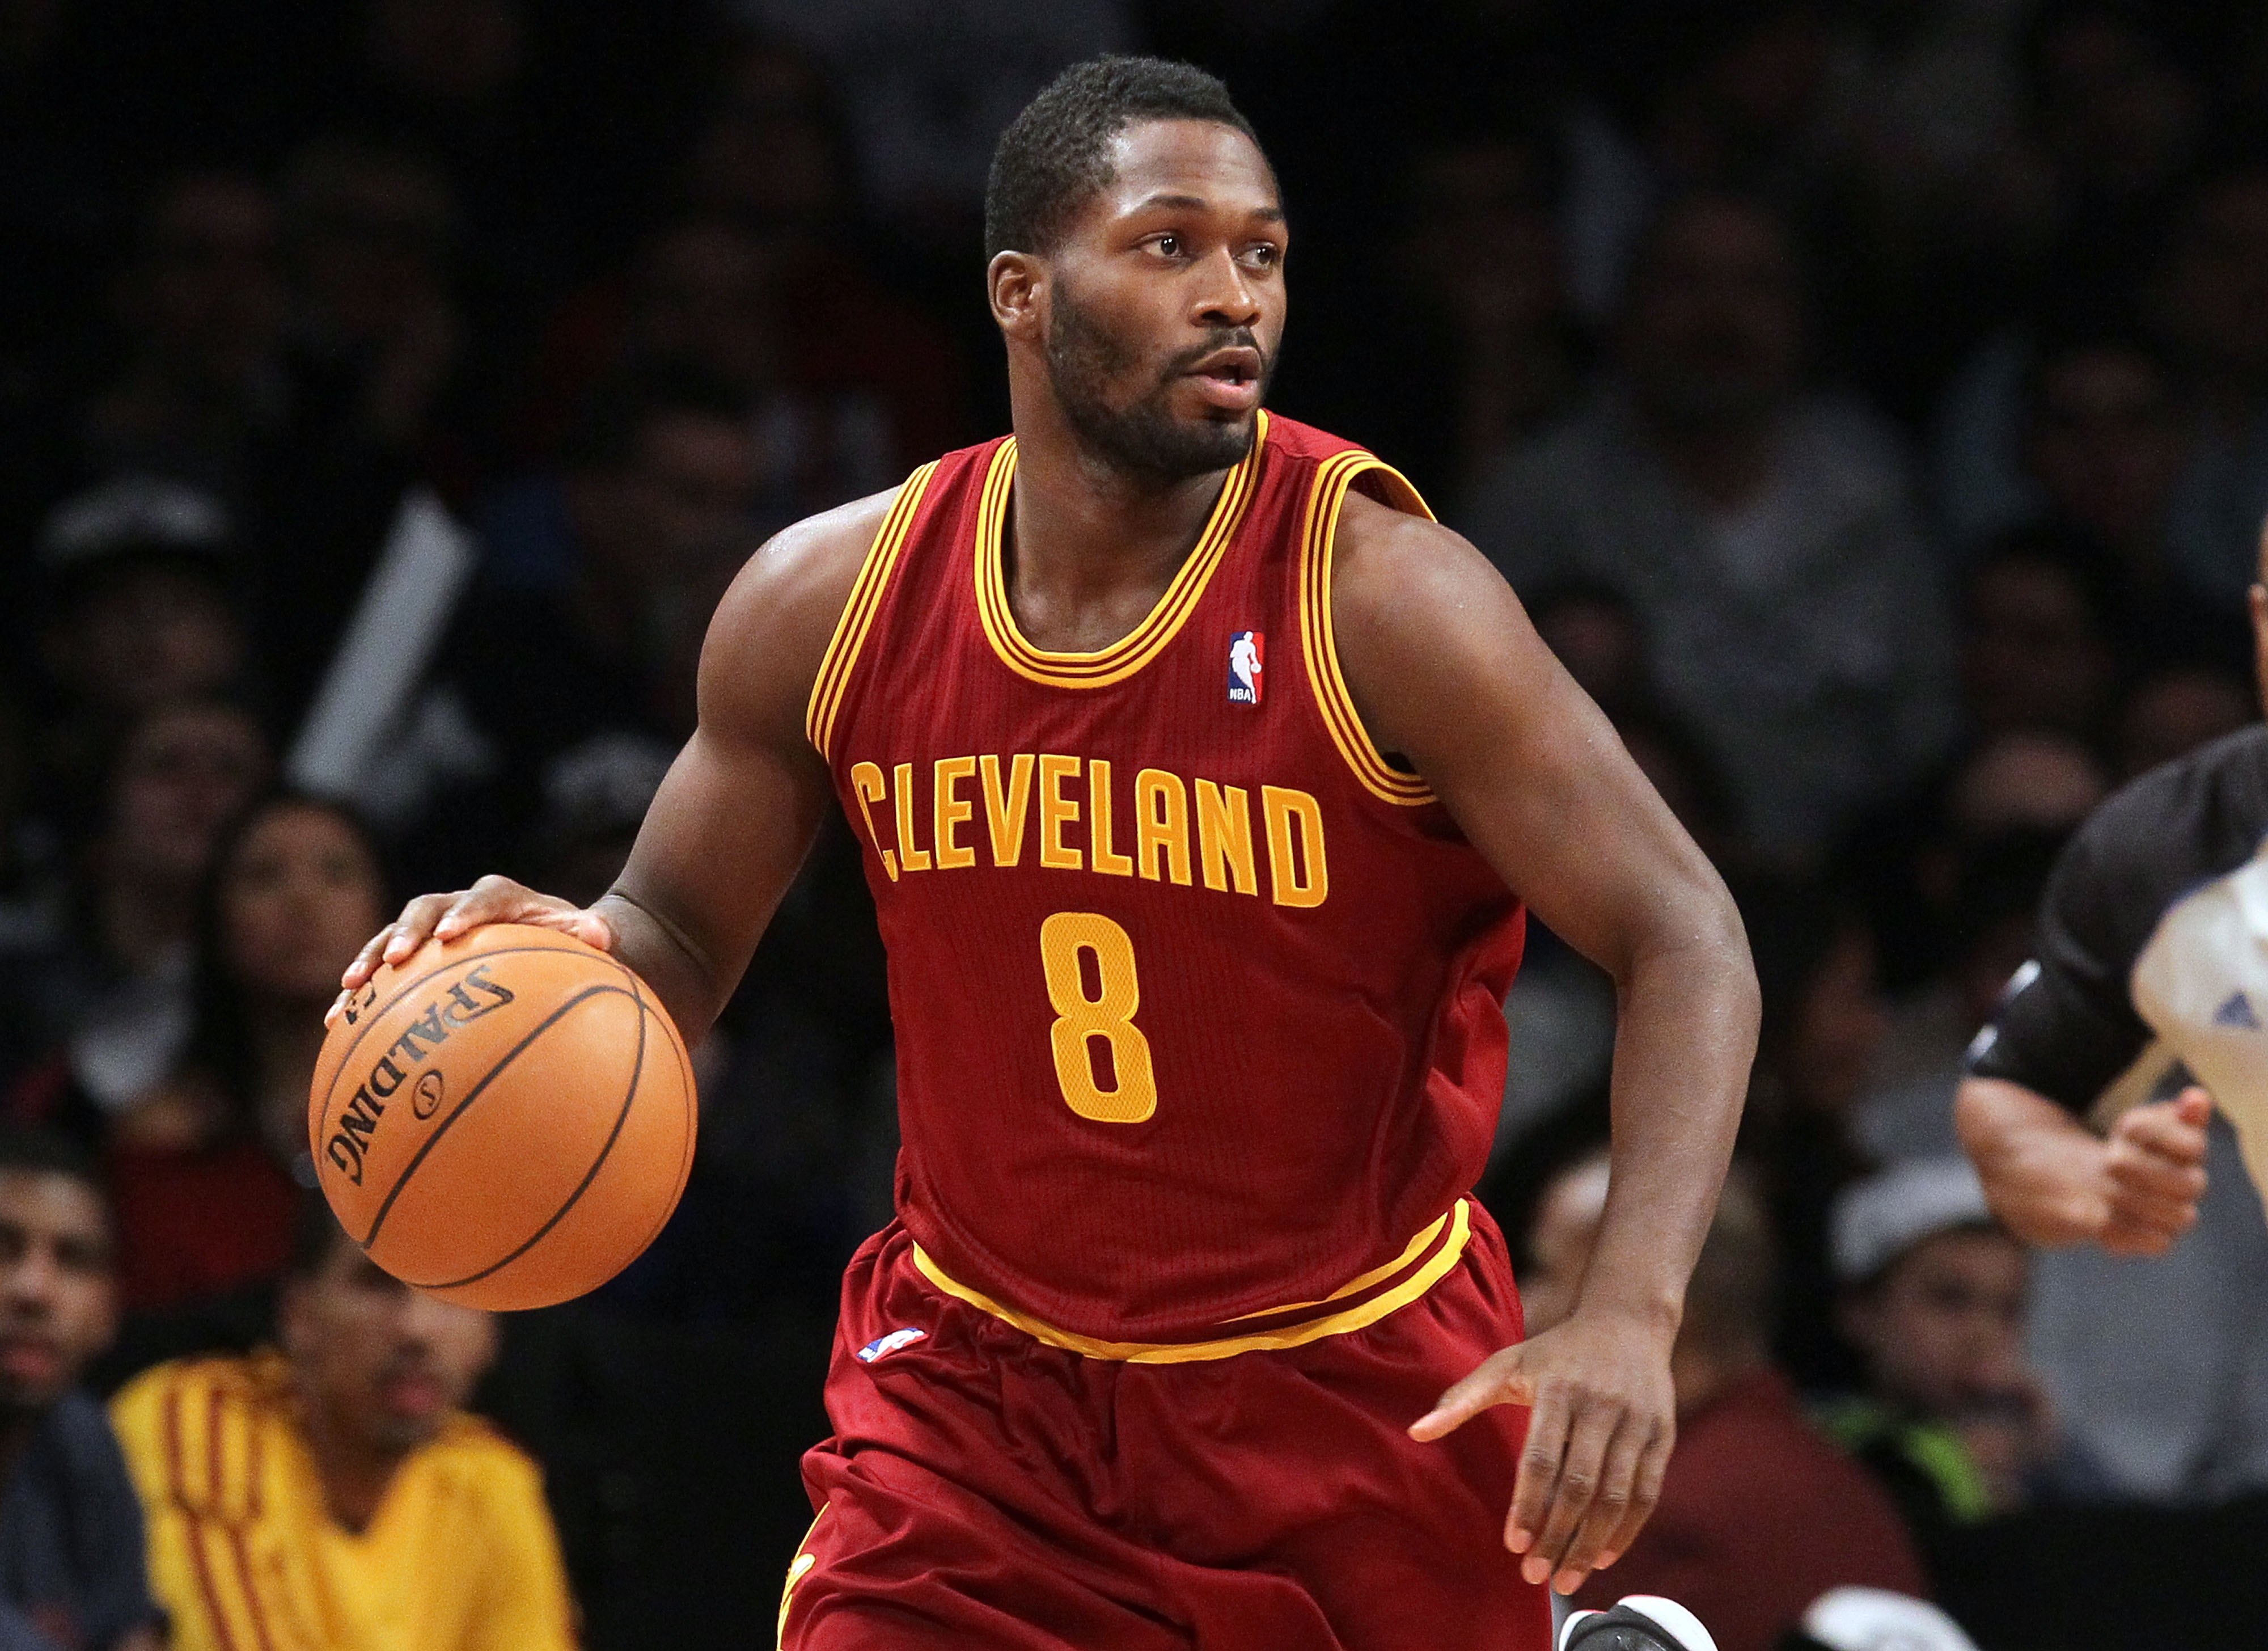 Jeremy Pargo, the top assister for the United States (Photo by Jim McIsaac/Getty Images)